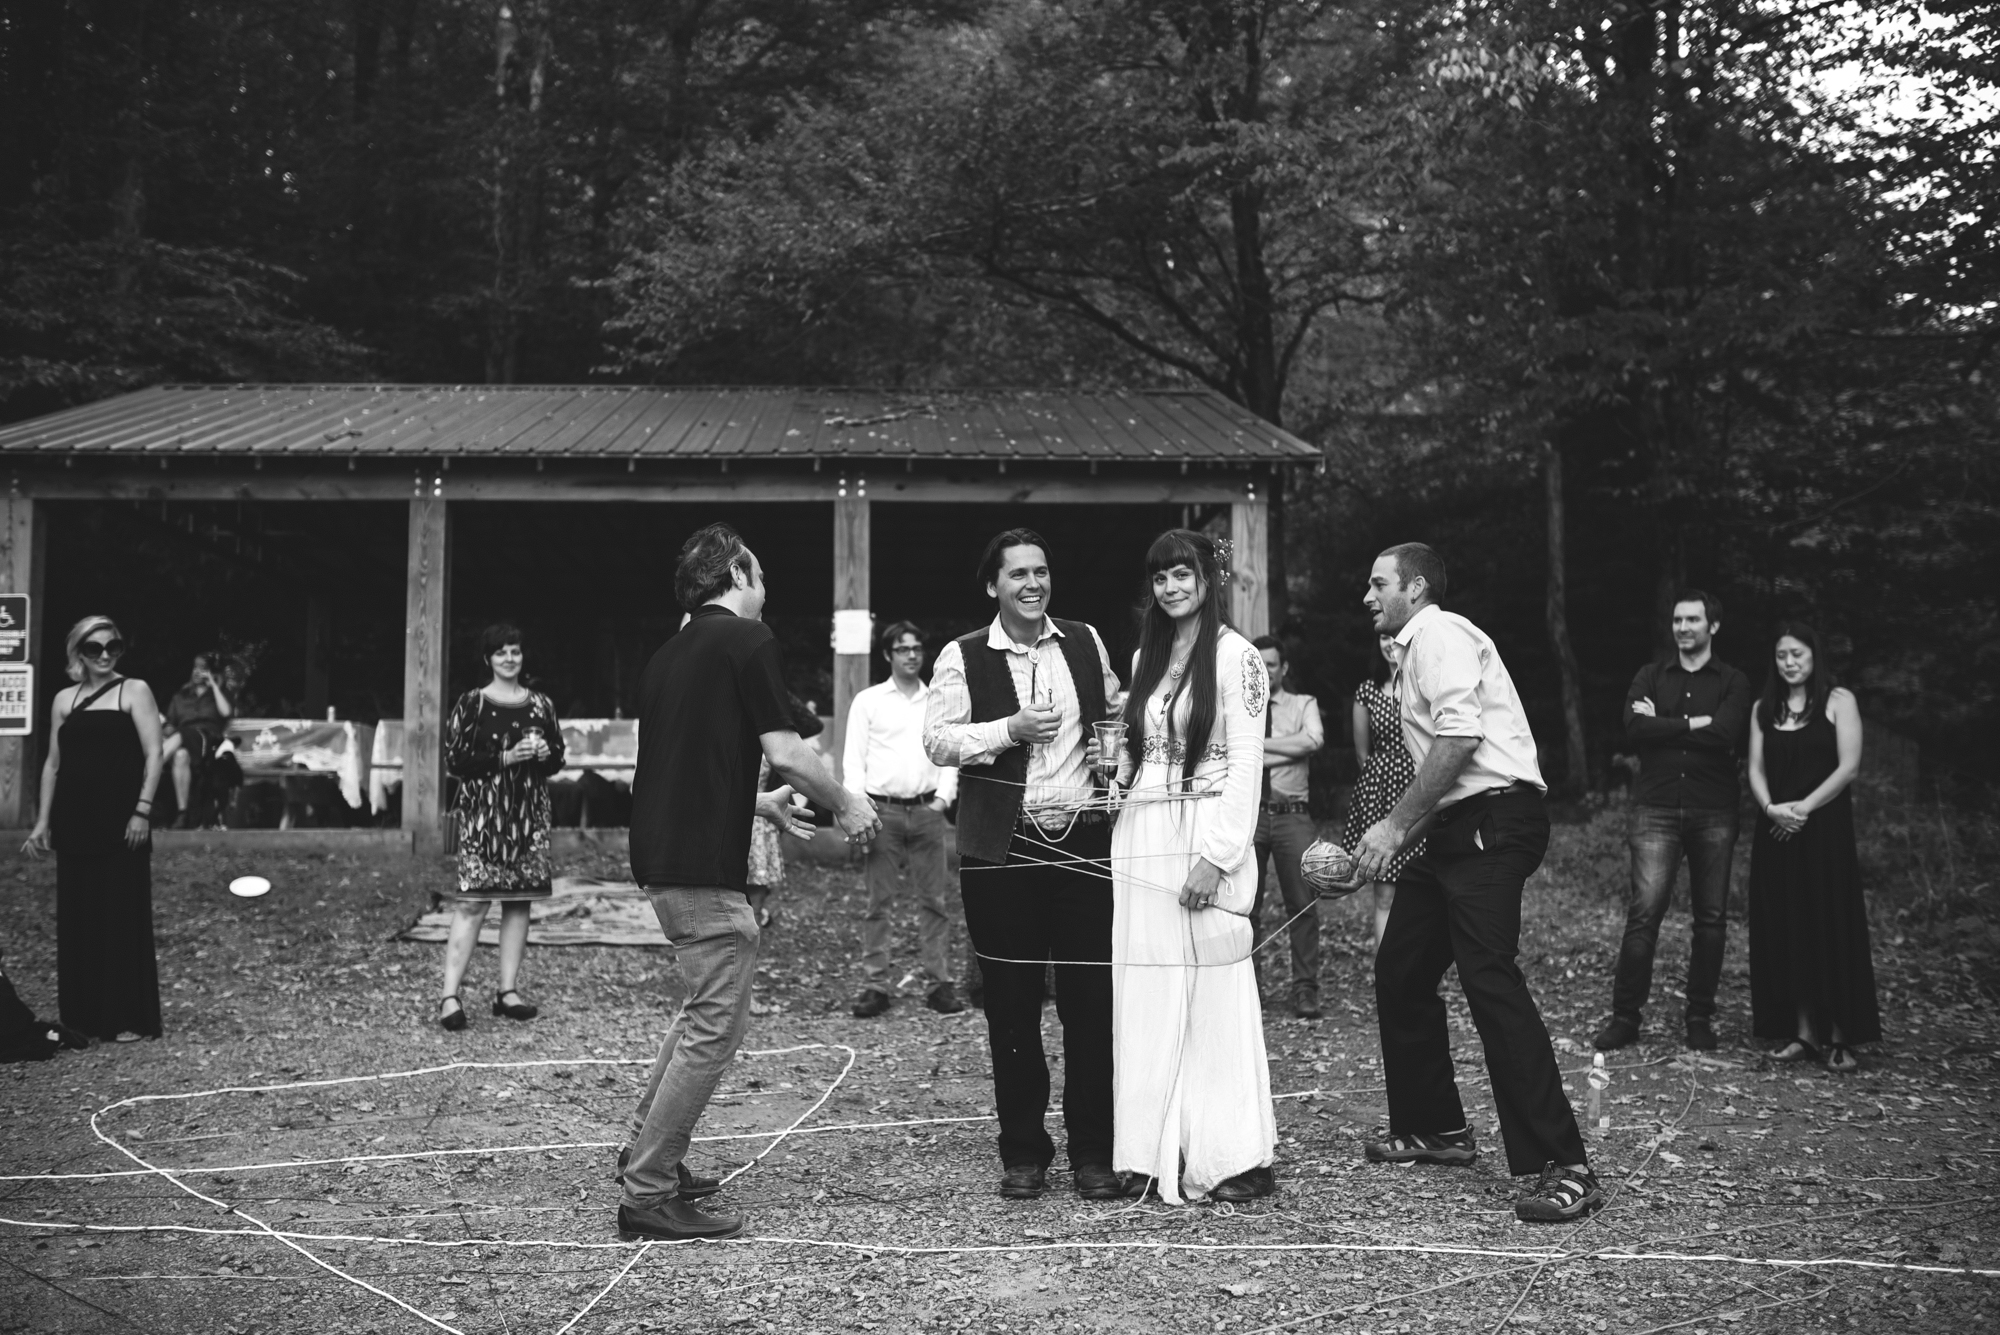  Mountain Wedding, Outdoors, Rustic, West Virginia, Maryland Wedding Photographer, DIY, Casual, bride and groom being joined with yarn, black and white photo, yarn ceremony 